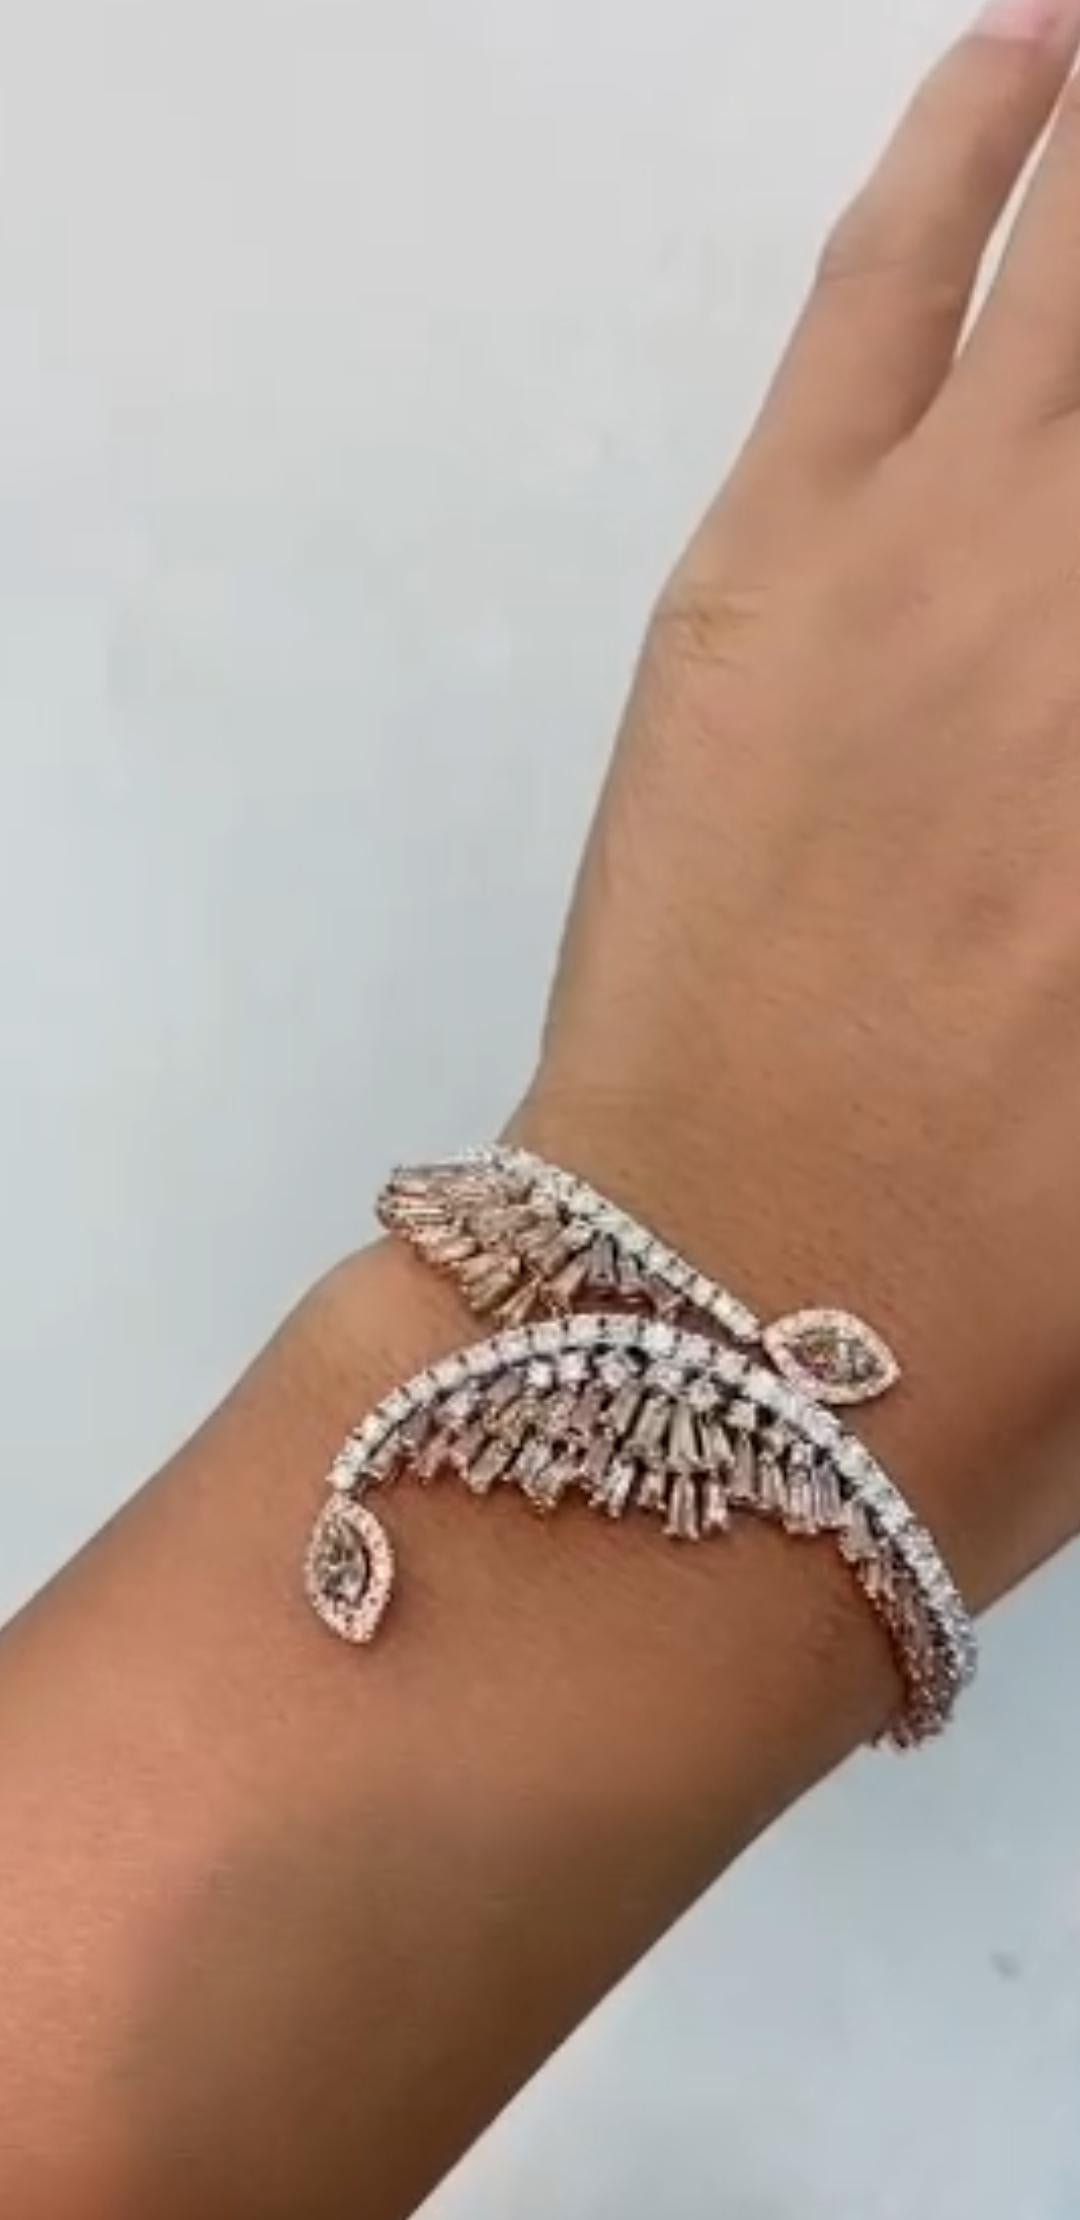 The Following Item we are offering is this Beautiful Rare Important 18KT Gold Large Glittering Fancy Deco Style Diamond Bracelet. Bracelet is comprised of approx 12CTS of Magnificent Rare Gorgeous Fancy Glittering Cognac and White Diamonds!!! The